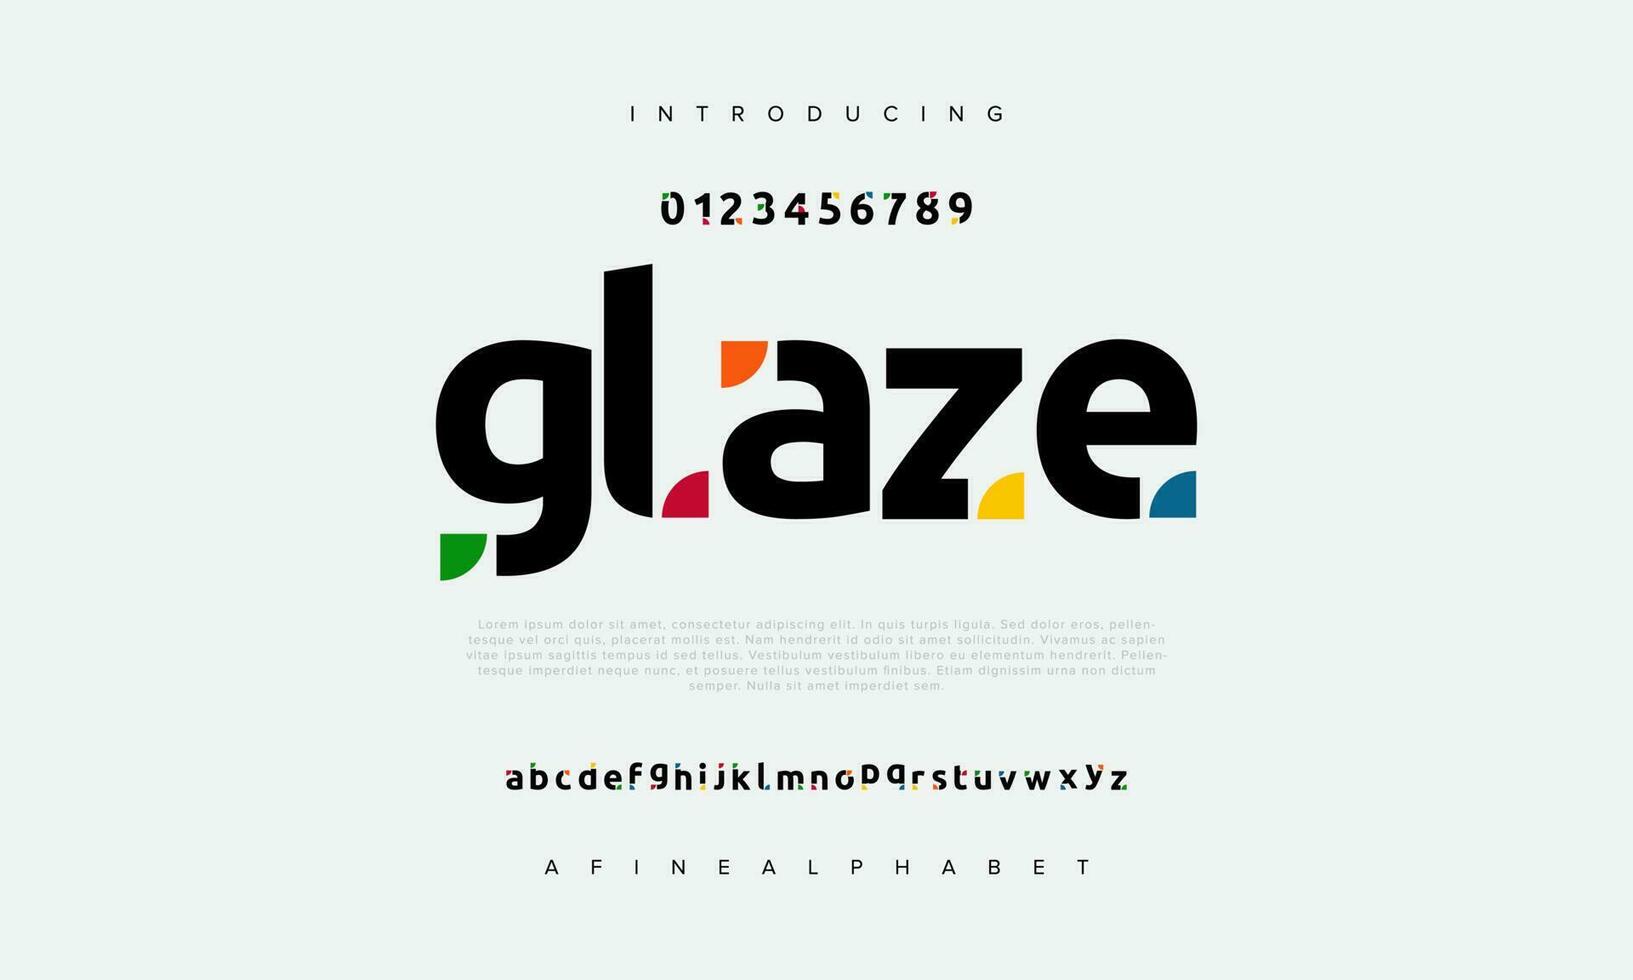 Glaze abstract digital technology logo font alphabet. Minimal modern urban fonts for logo, brand etc. Typography typeface uppercase lowercase and number. vector illustration